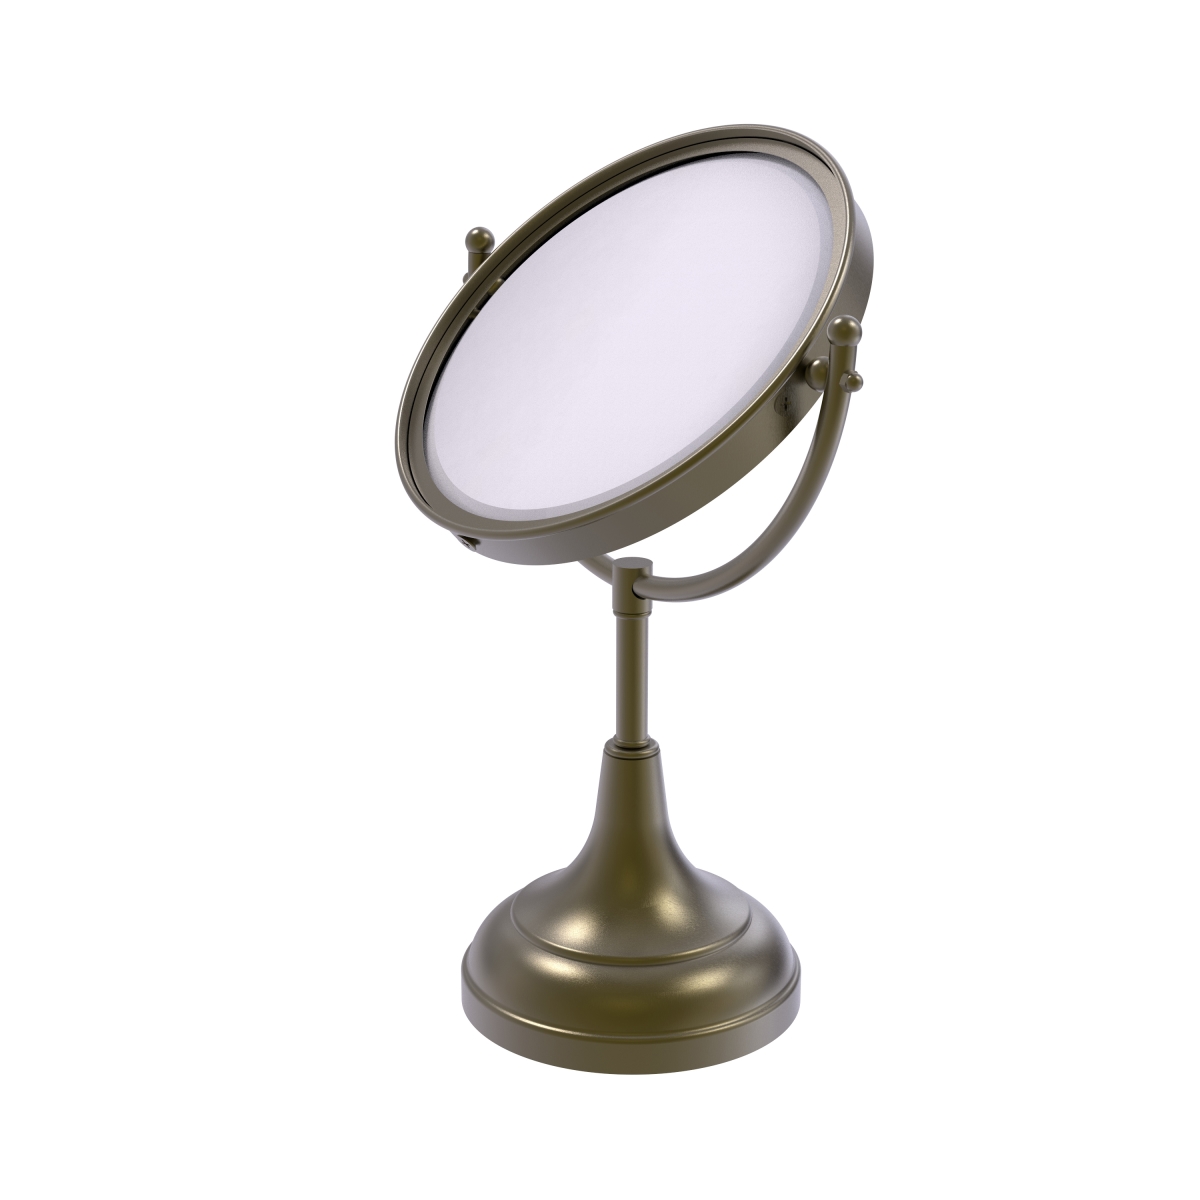 Picture of Allied Brass DM-2-2X-ABR 8 in. Vanity Top Make-Up Mirror 2X Magnification, Antique Brass - 15 x 8 x 8 in.